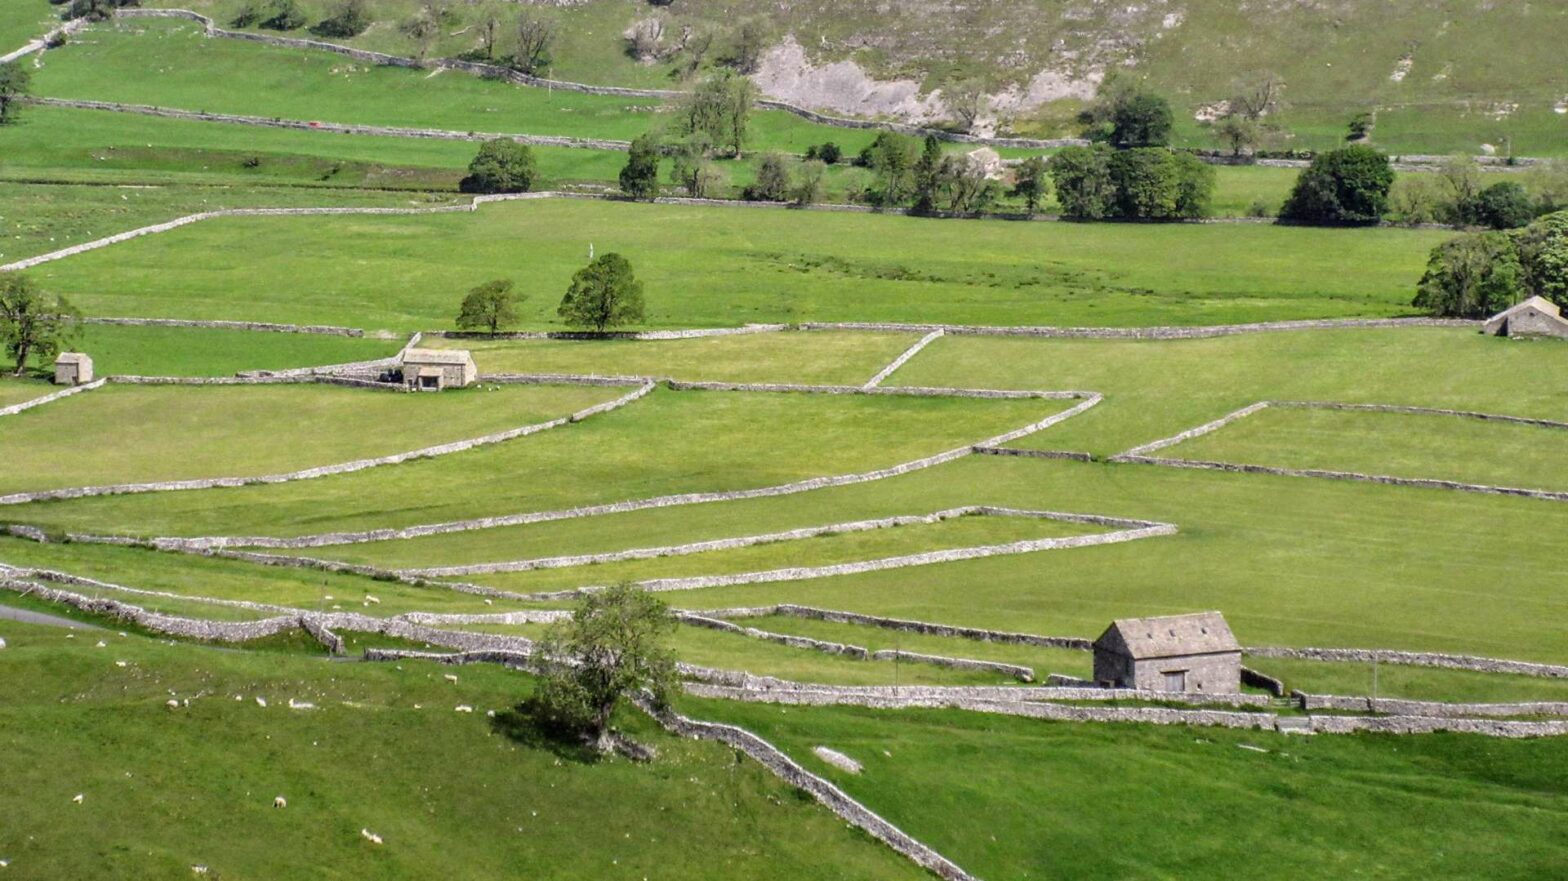 Littondale in the Yorkshire Dales